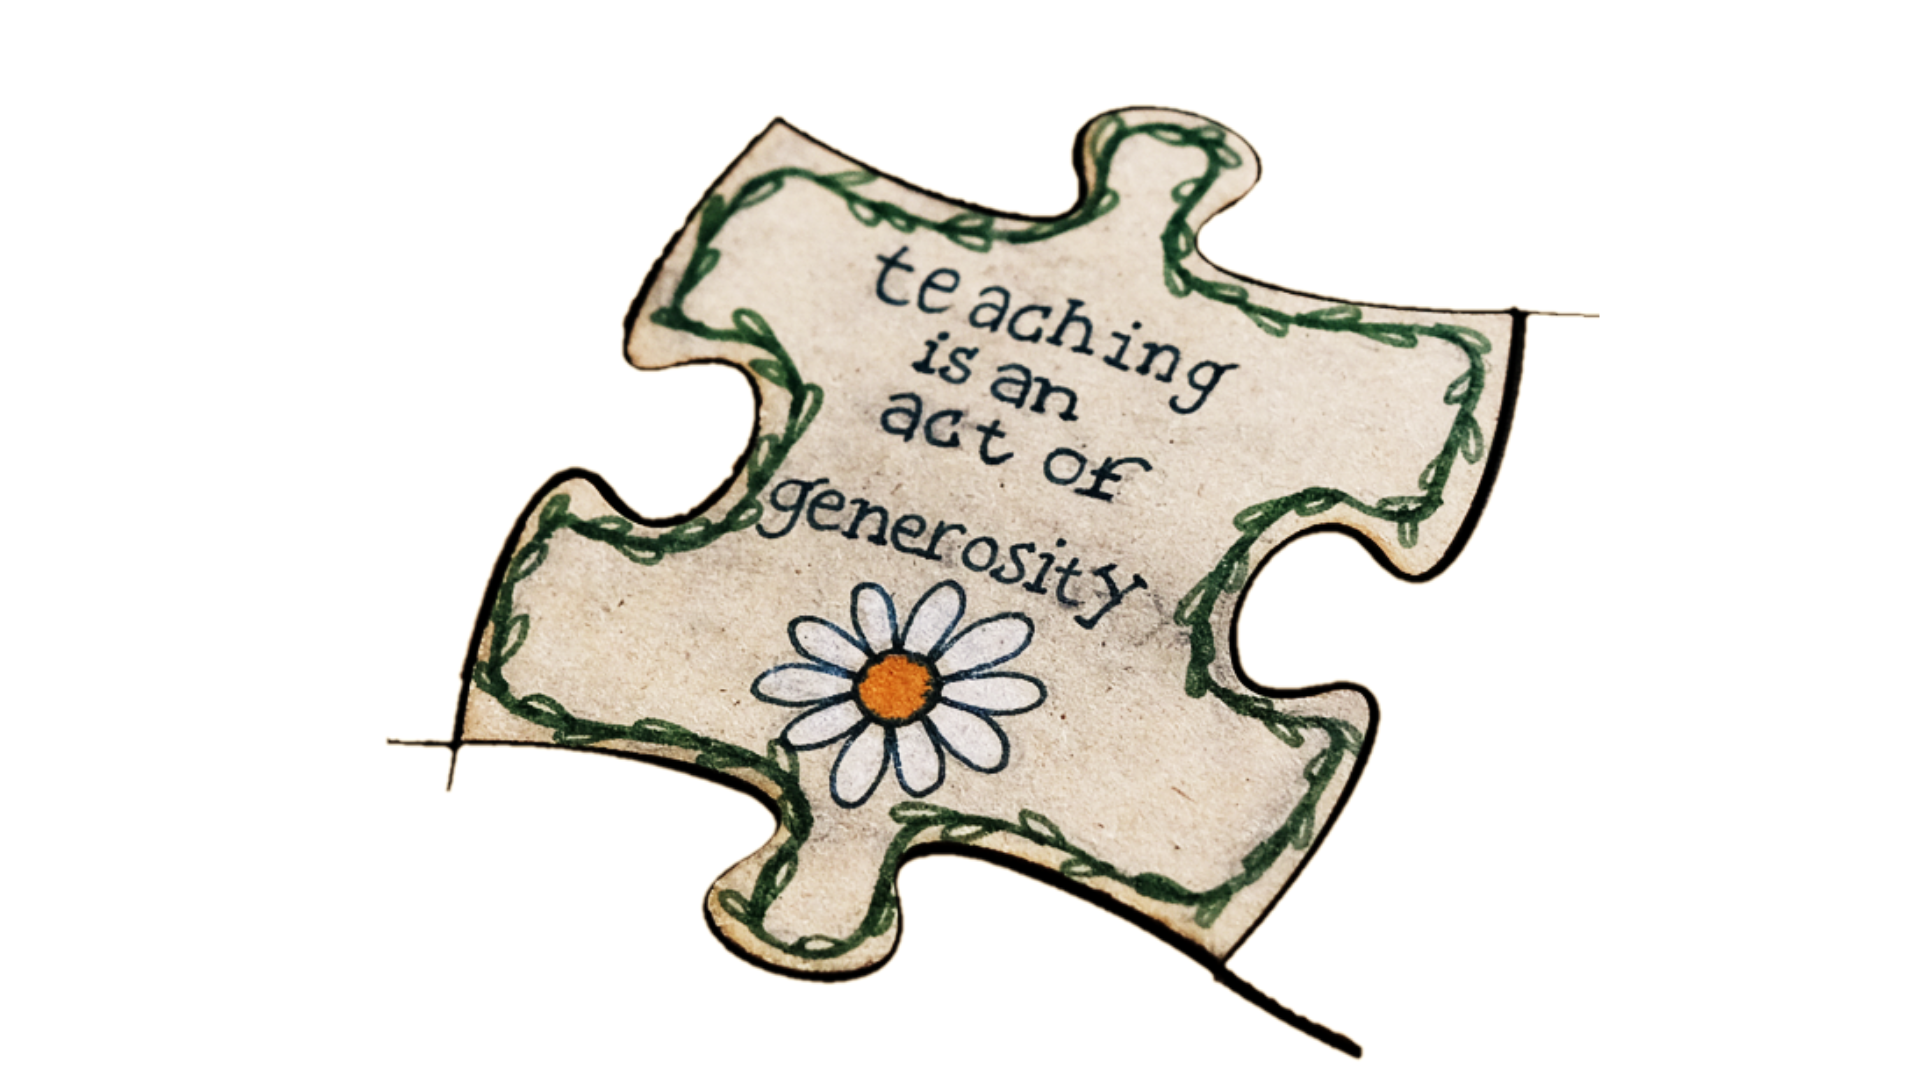 UM Education Days Teaching is an act of generosity